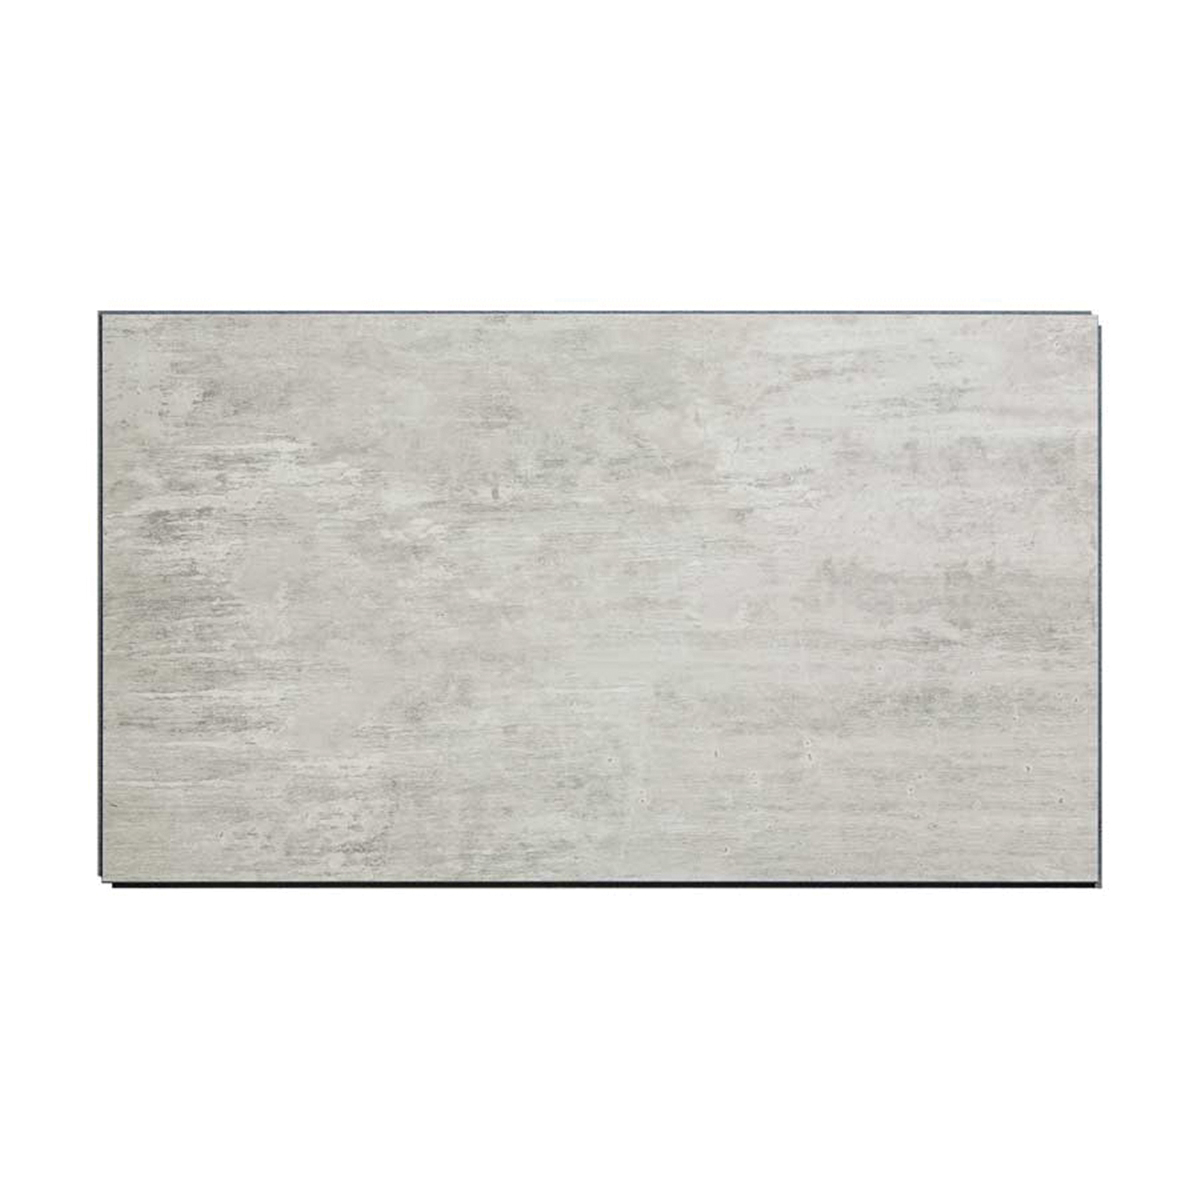 53006 Large Wall Tile, 25.6 in L, 14.8 in W, Interlocking Edge, Vinyl, Wind Gust, Adhesive Installation